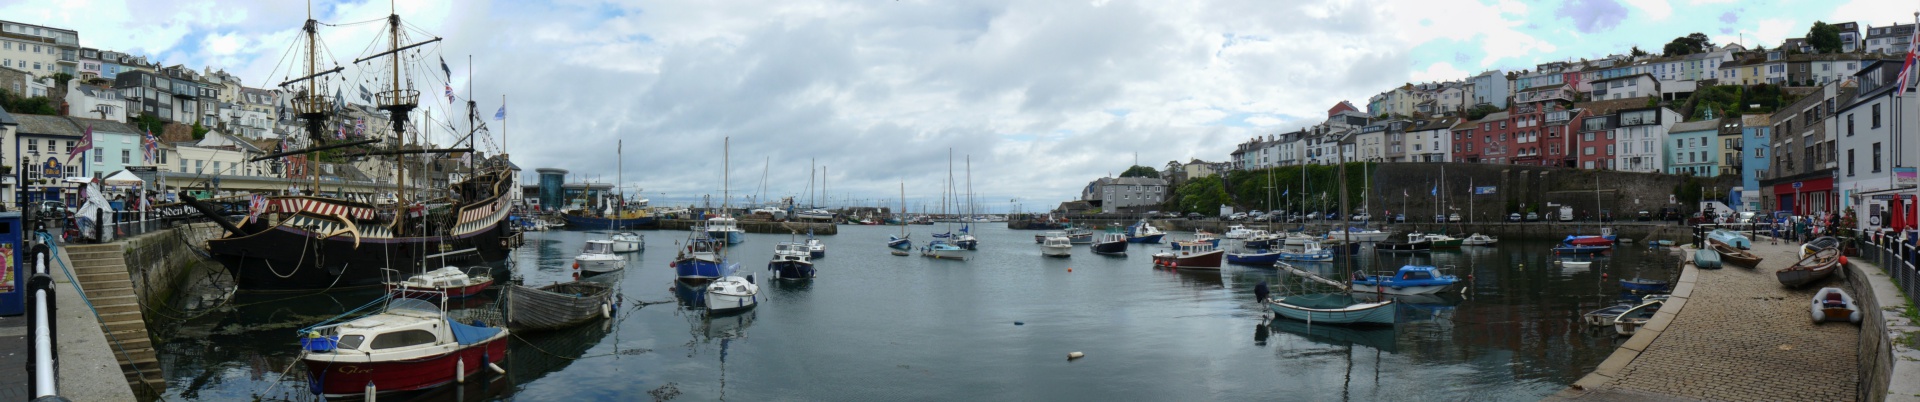 Select this image to see a larger version. Brixham Harbour, June 2016 <c> Tim Hill